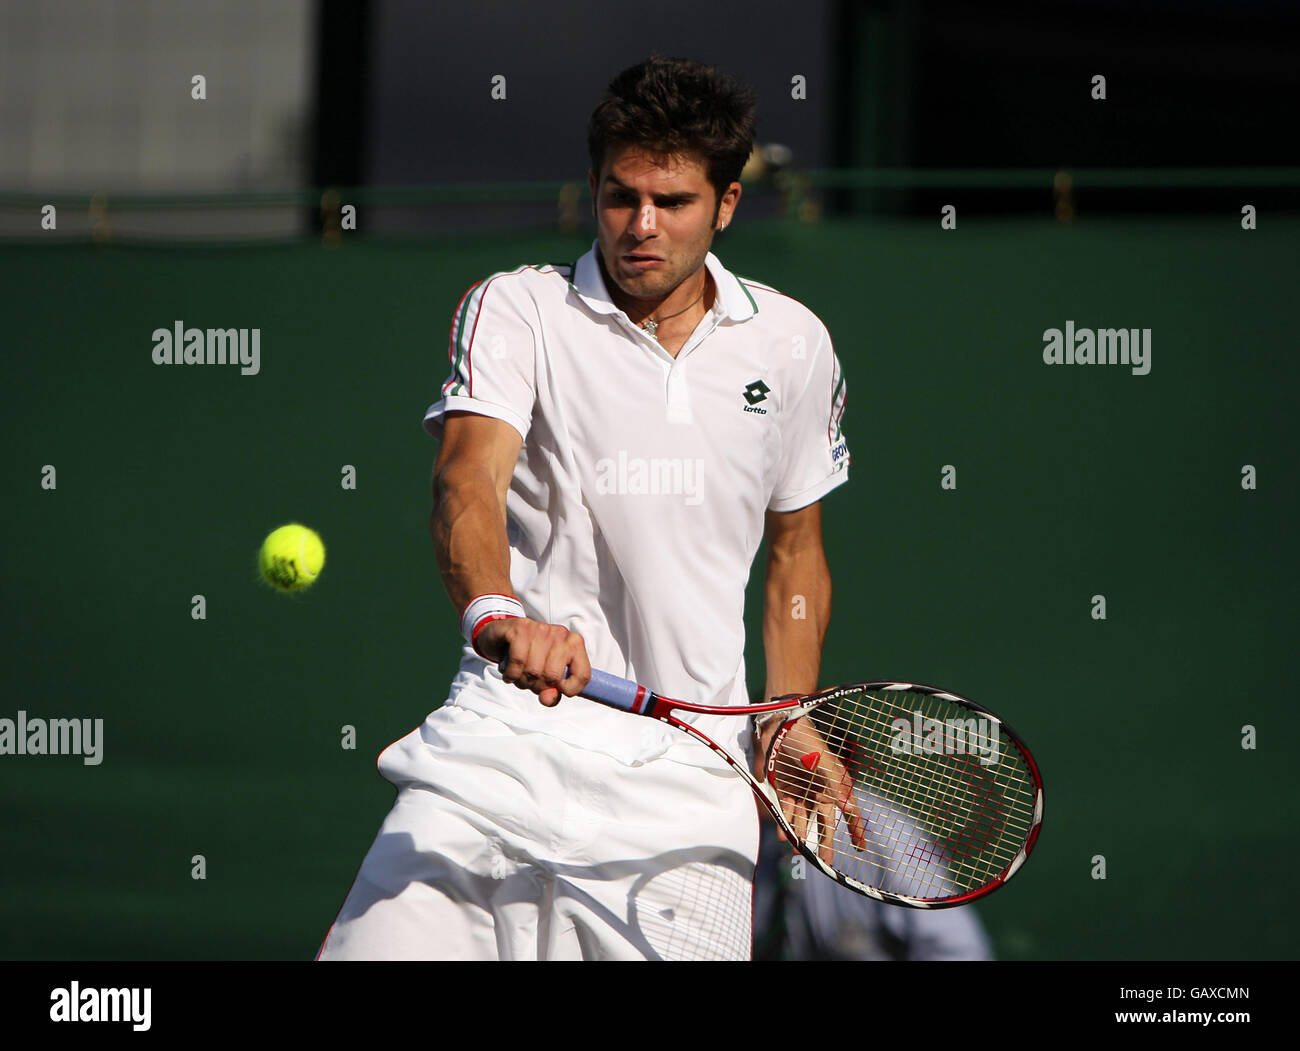 Italy's Simone Bolelli against Chile's Fernando Gonzalez during The Wimbledon Championships at The All England Lawn Tennis Club, Wimbledon, London. Stock Photo